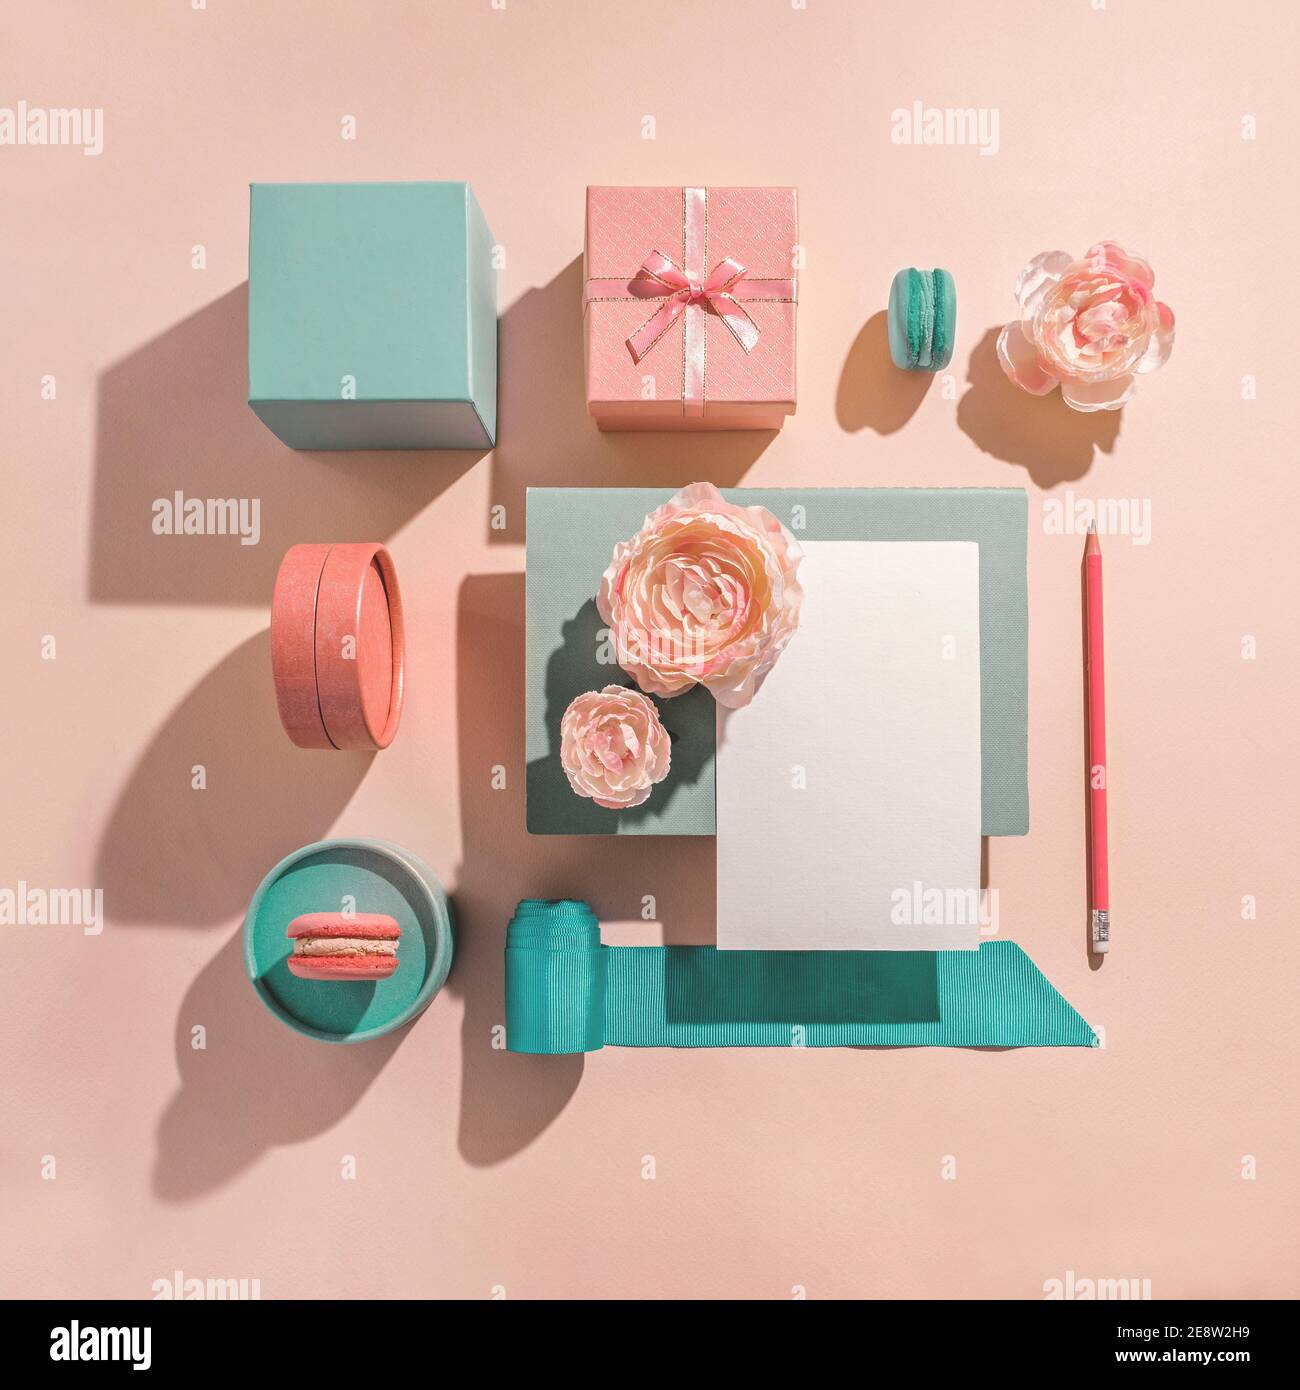 Festive geometric arrangement of gift boxes in muted pastel colors. Congratulations on women's day and birthday. Romantic concept for womens party Stock Photo